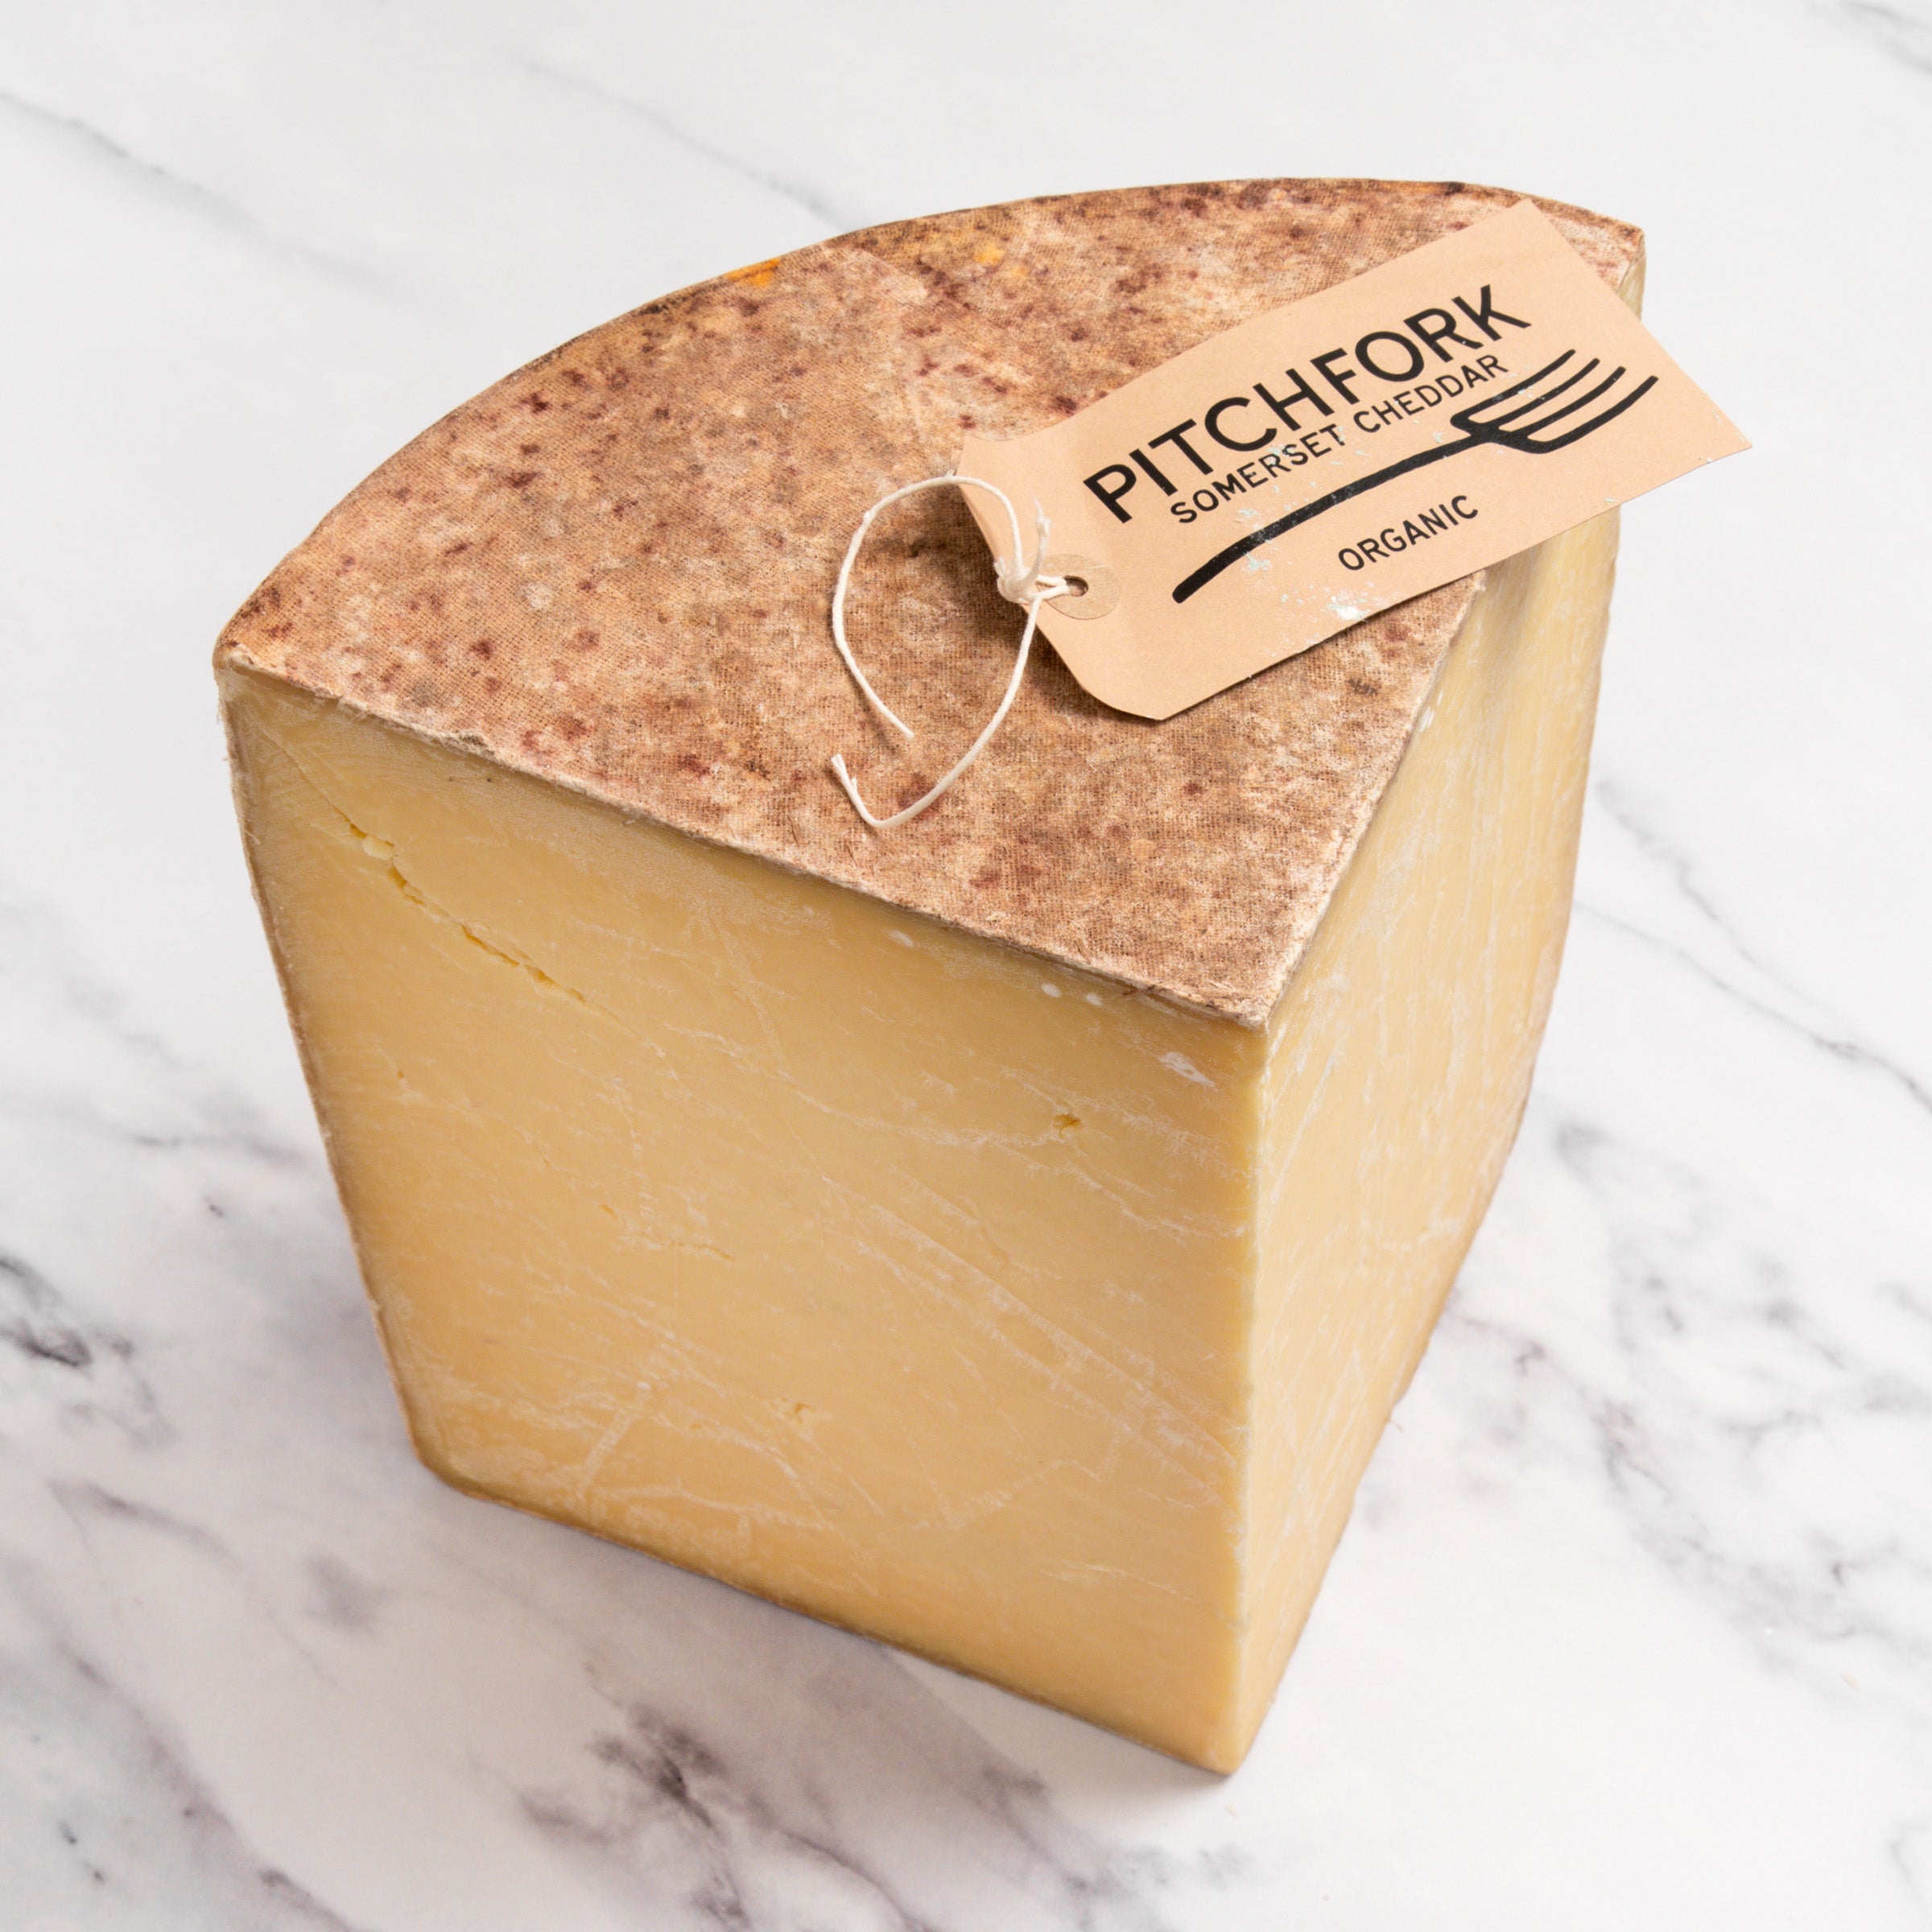 15367_igourmet_pitchfork Somerset cheddar_the fine cheese company_Trethowan brothers_cheese